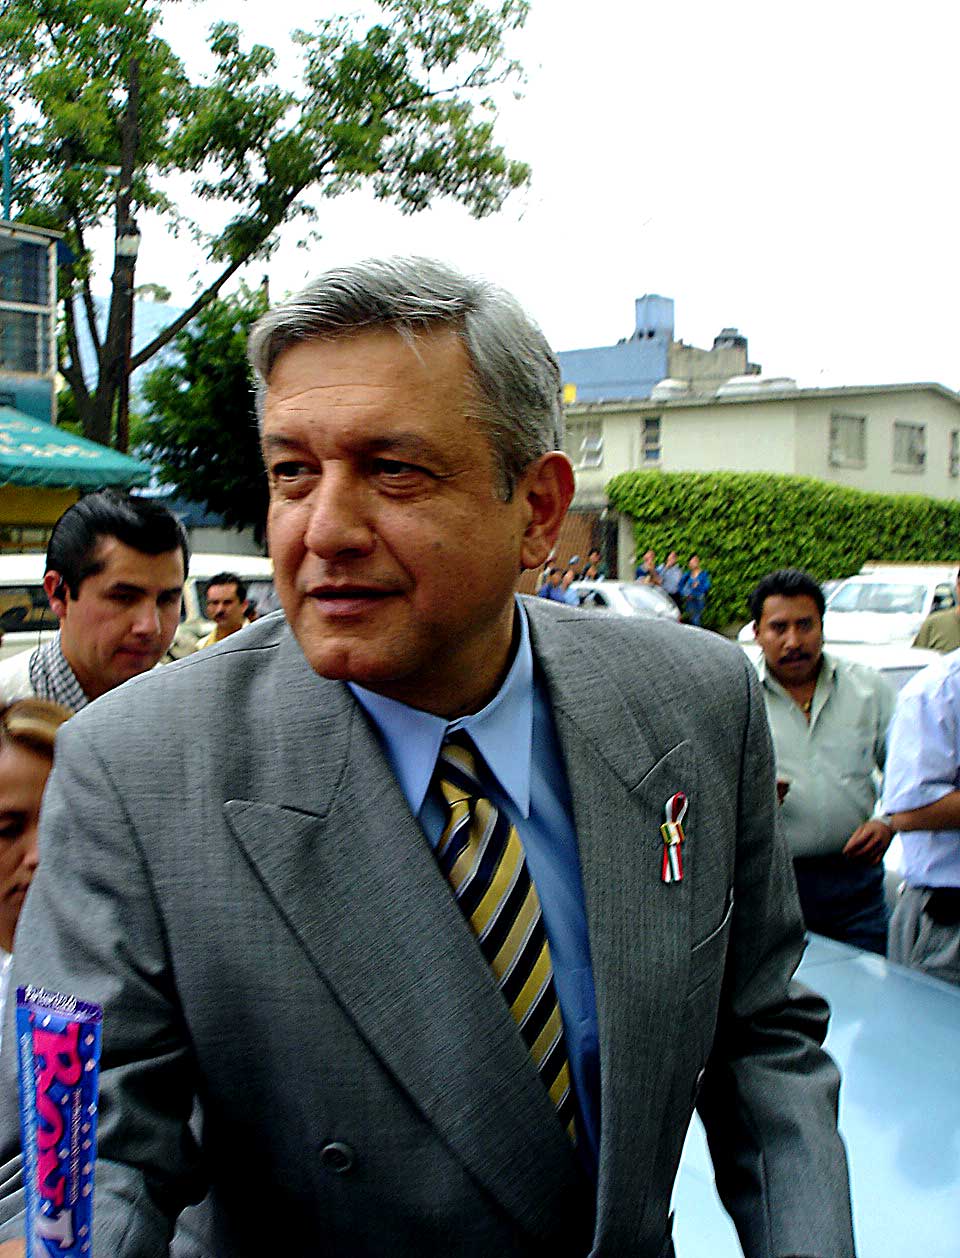 a man in a suit walks past a blue car with a gold stripe tie